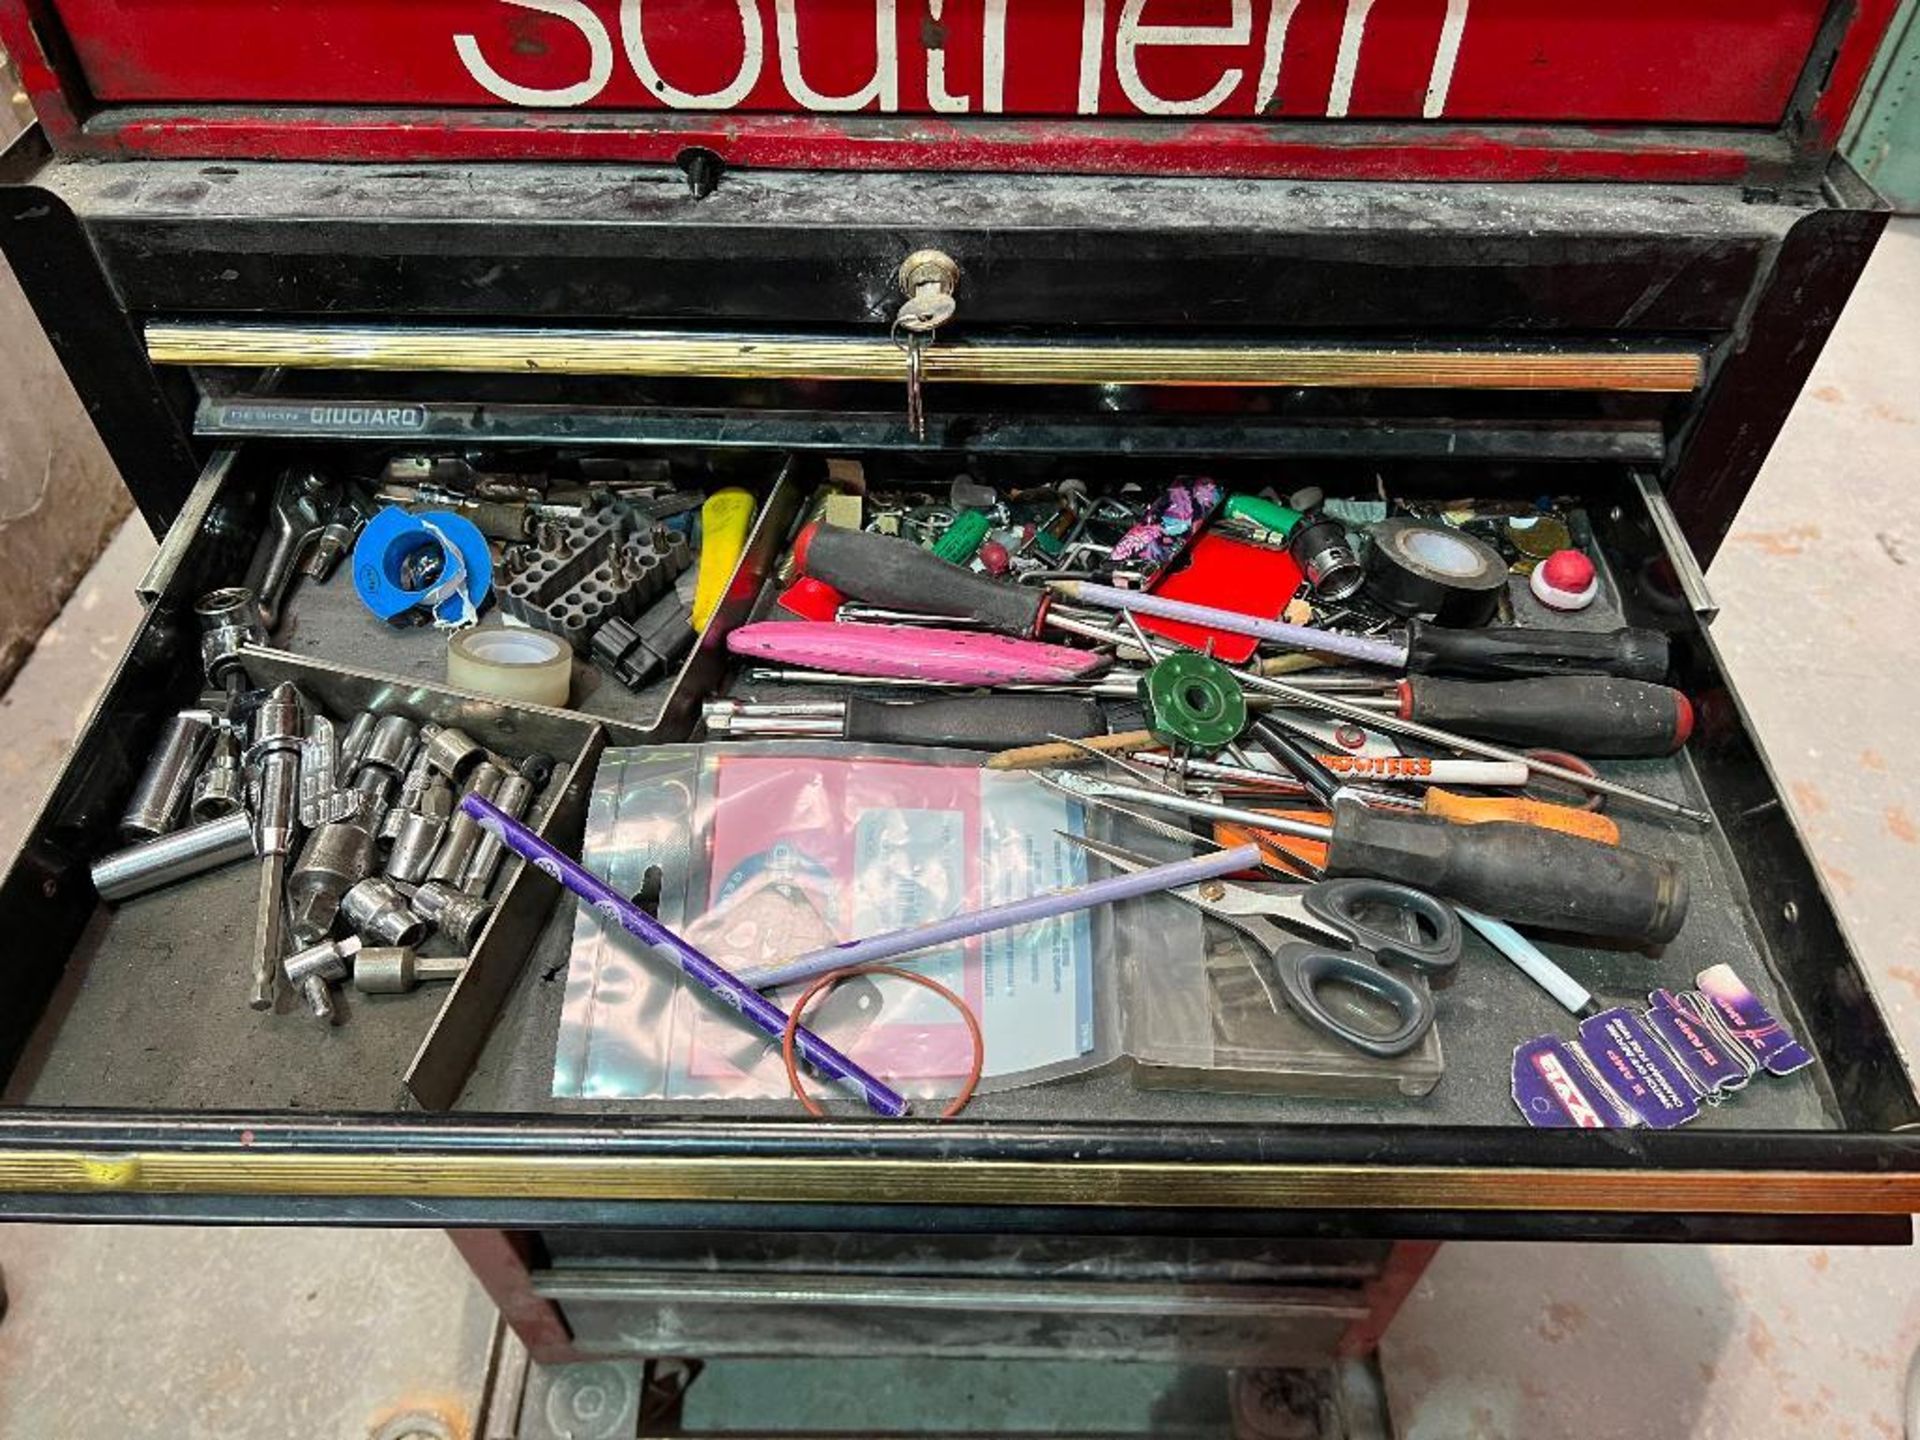 Mobile Tool Chest Comprising 3 Tool Boxes including contents as shown from Brands including Snap-On - Image 7 of 17